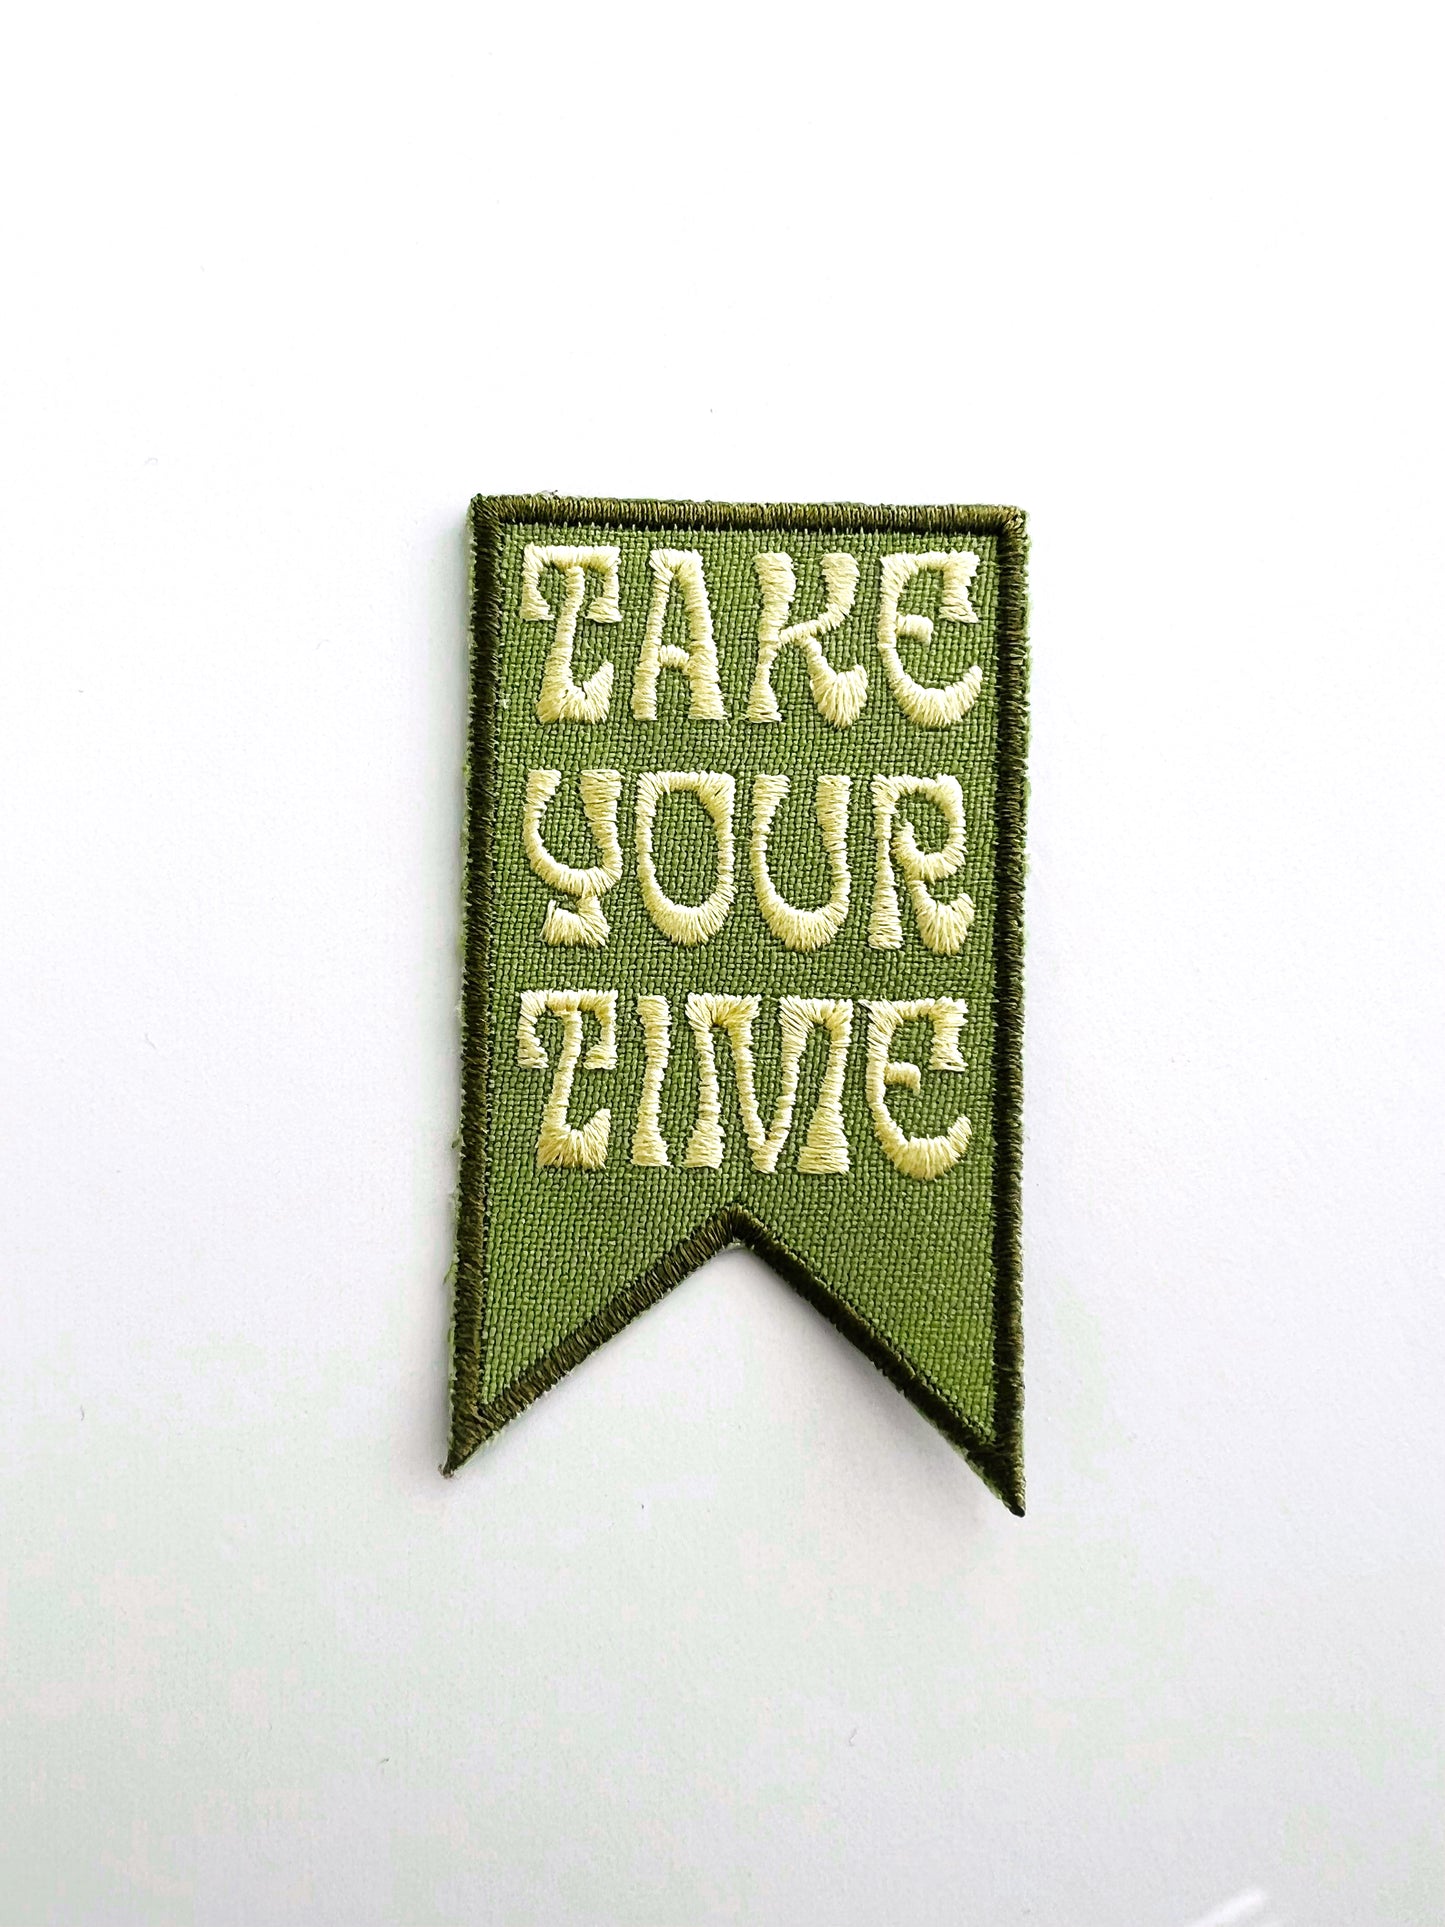 Take Your Time Embroidered Iron-on Patch